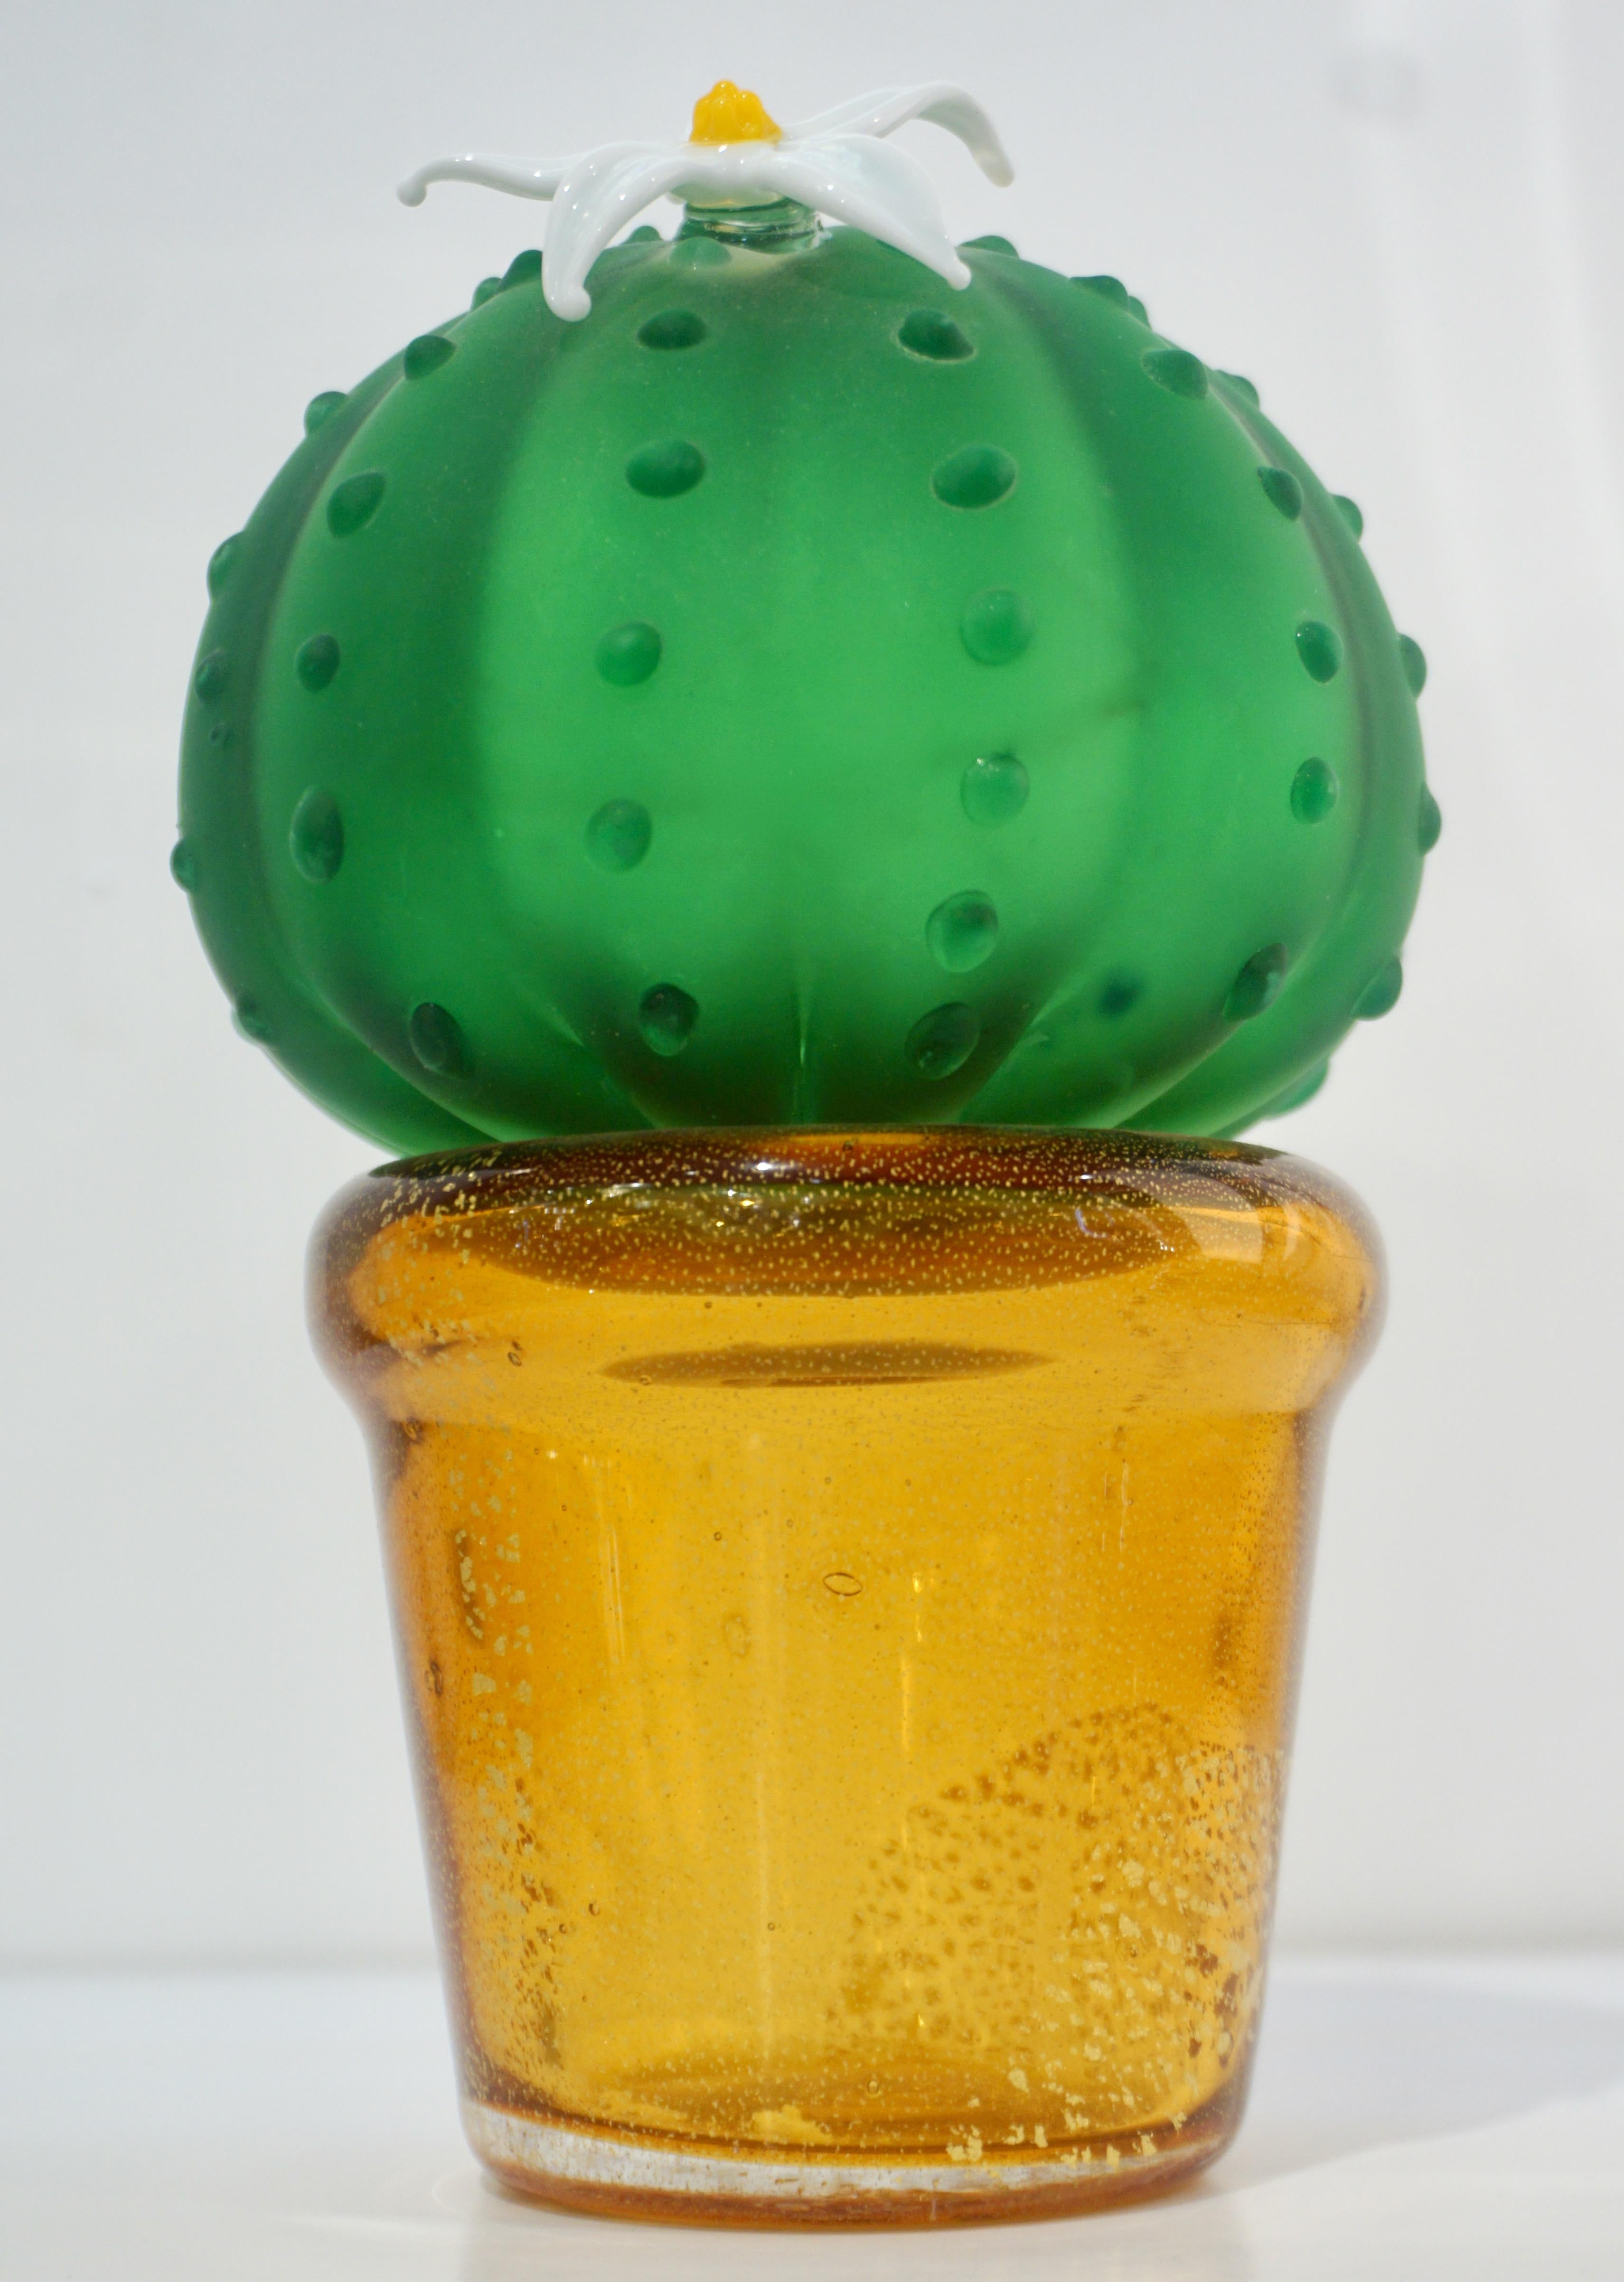 Organic Modern Formia 1990s Vintage Italian Green Murano Glass Cactus Plant with White Flower For Sale